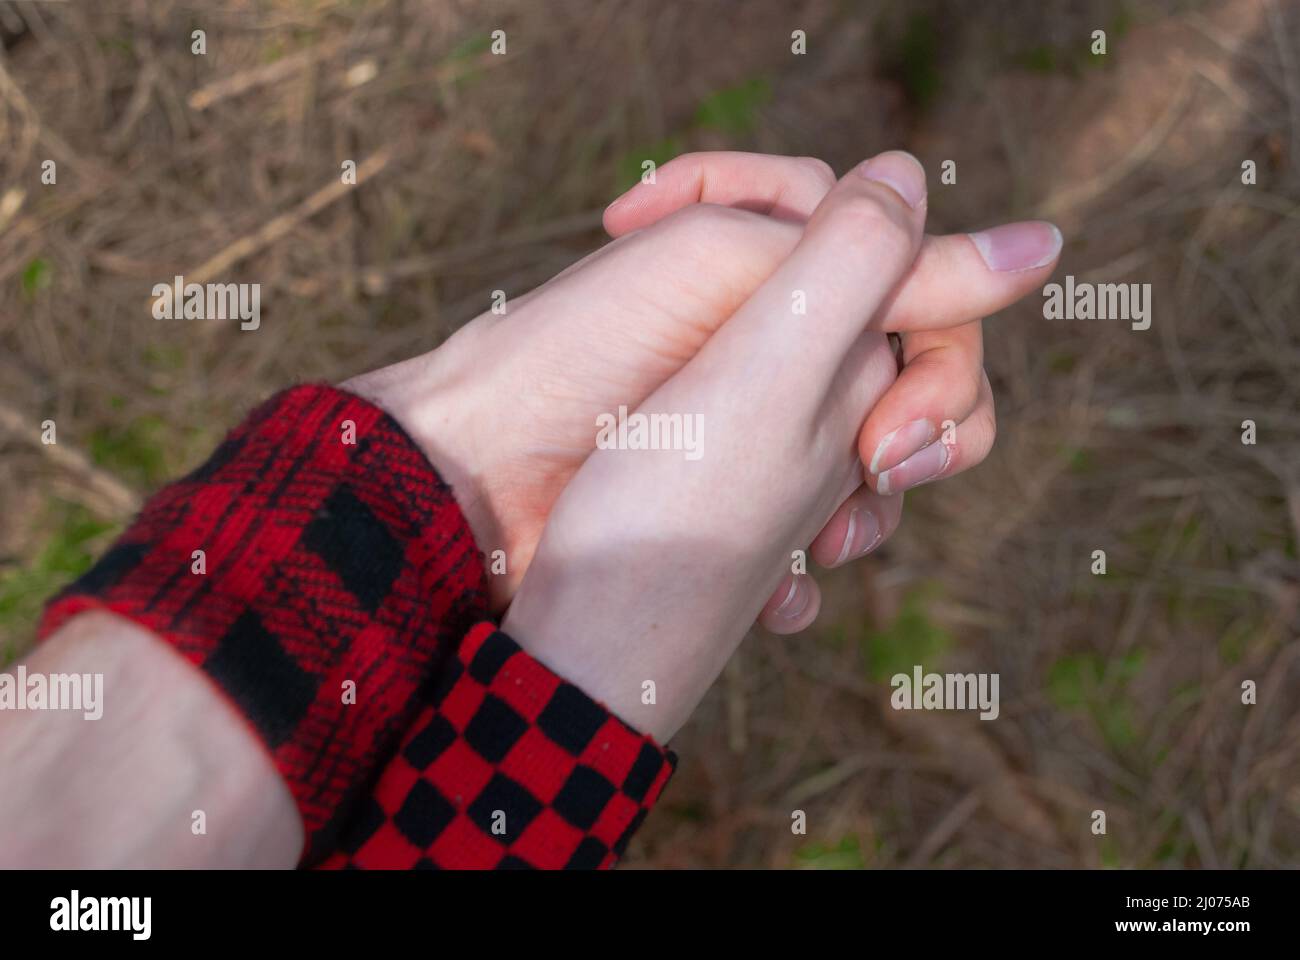 Punk emo couple holding hands, wearing red checkered armbinde while walking outdoors in the forest, close-up Stock Photo